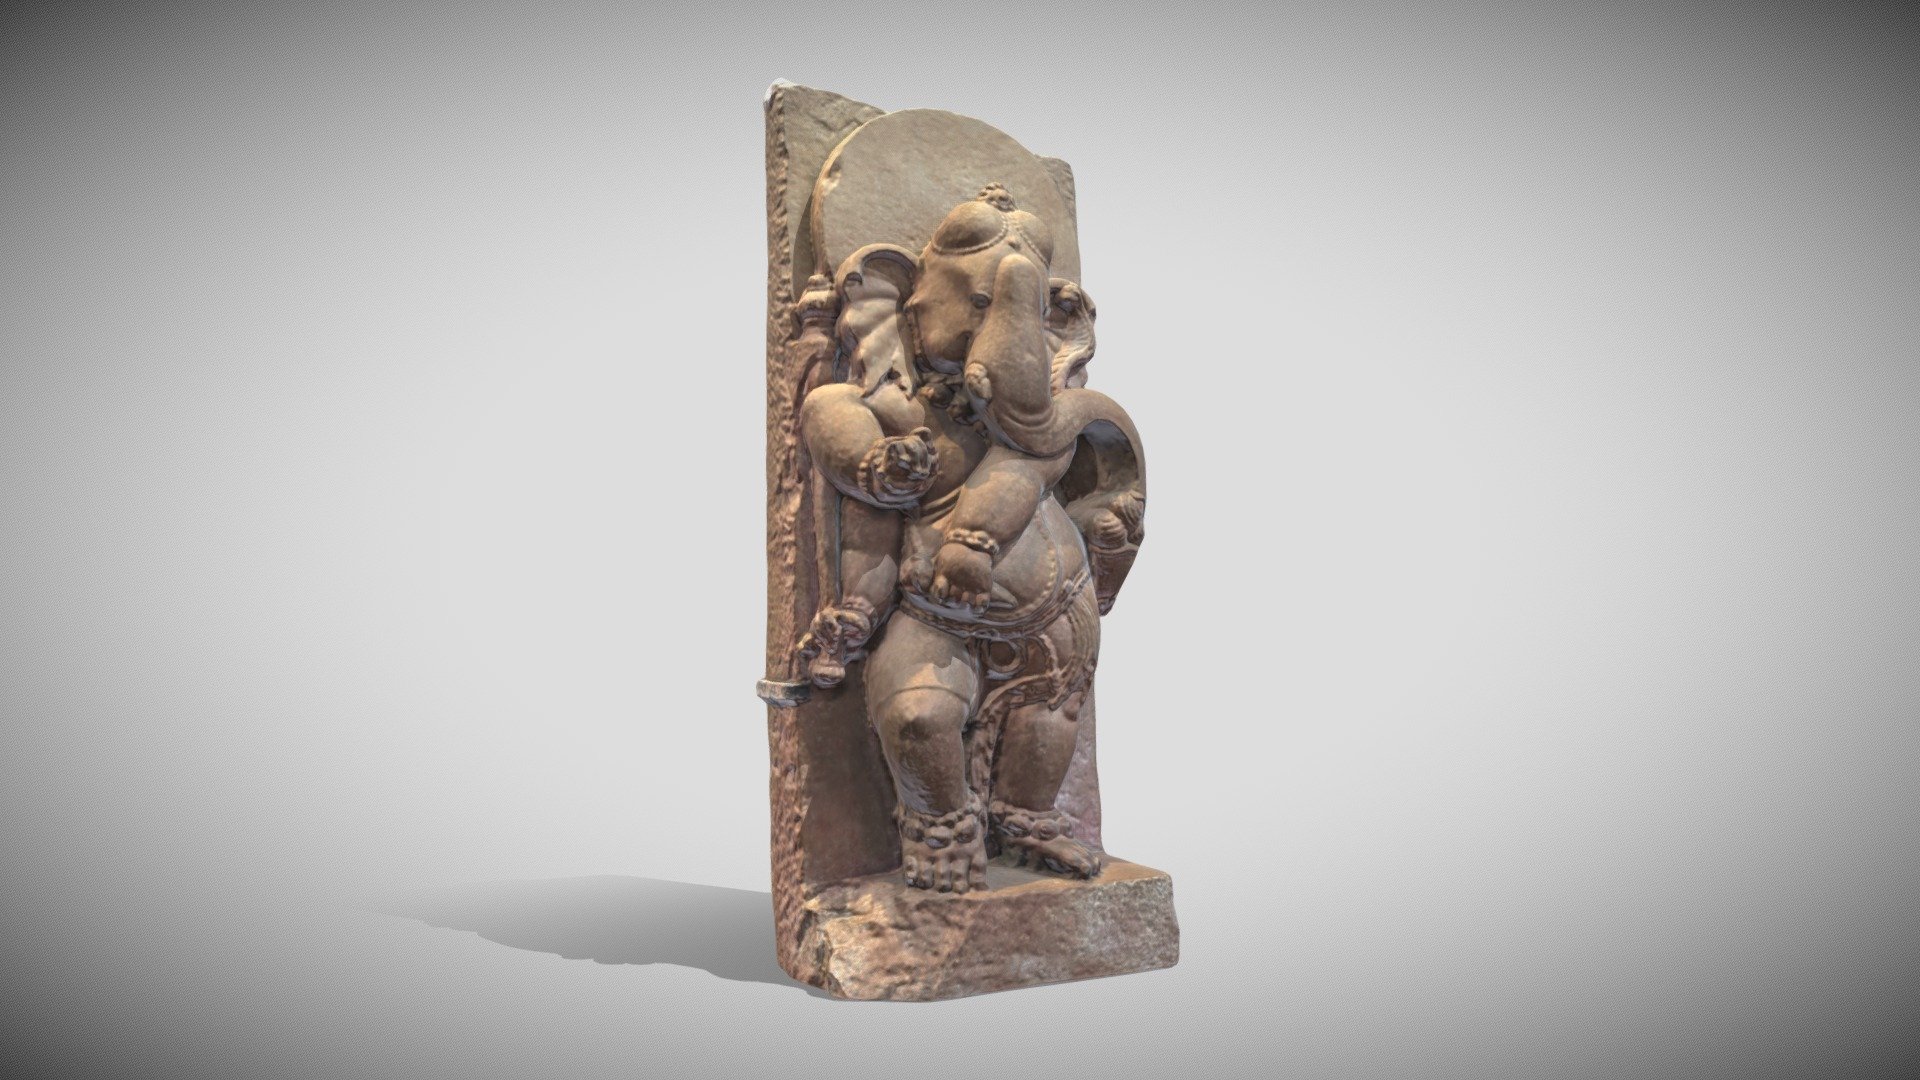 Evolution of 3D Model - Good Original 3D Scan is https://skfb.ly/P9CE 
by Thomas Flynn   (Well Done!) - 

3D Models has to go and run in the code of the Renderings, Games and Animations&hellip;   

*Evolution came from Sharing&hellip;   *

Jhai Ganesha Deva! Help Us in this difficult time - Ganesh British Museum - Download Free 3D model by Francesco Coldesina (@topfrank2013) 3d model